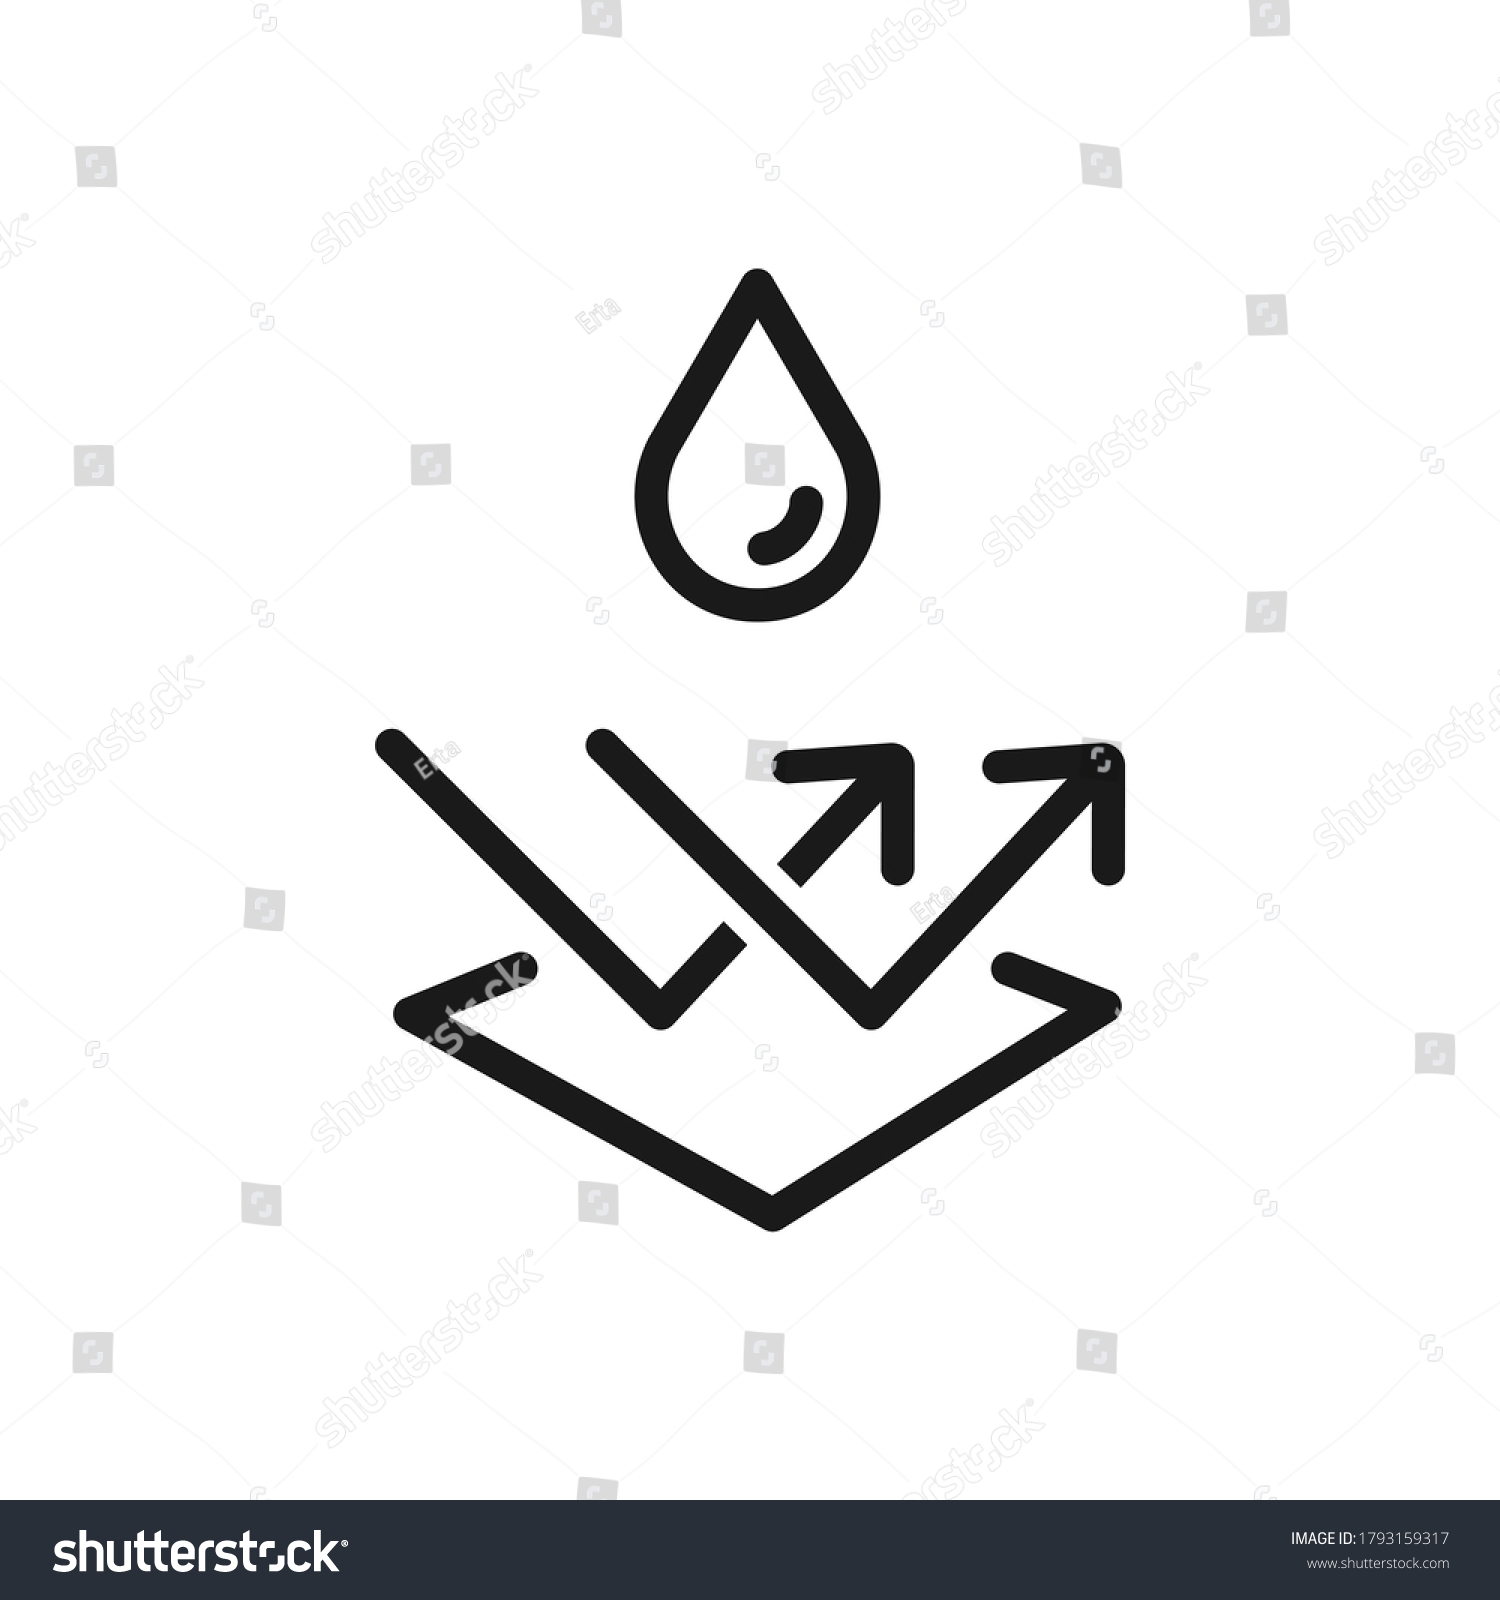 Water repellent surface line icon. Waterproof symbol concept isolated on white background. Vector illustration #1793159317